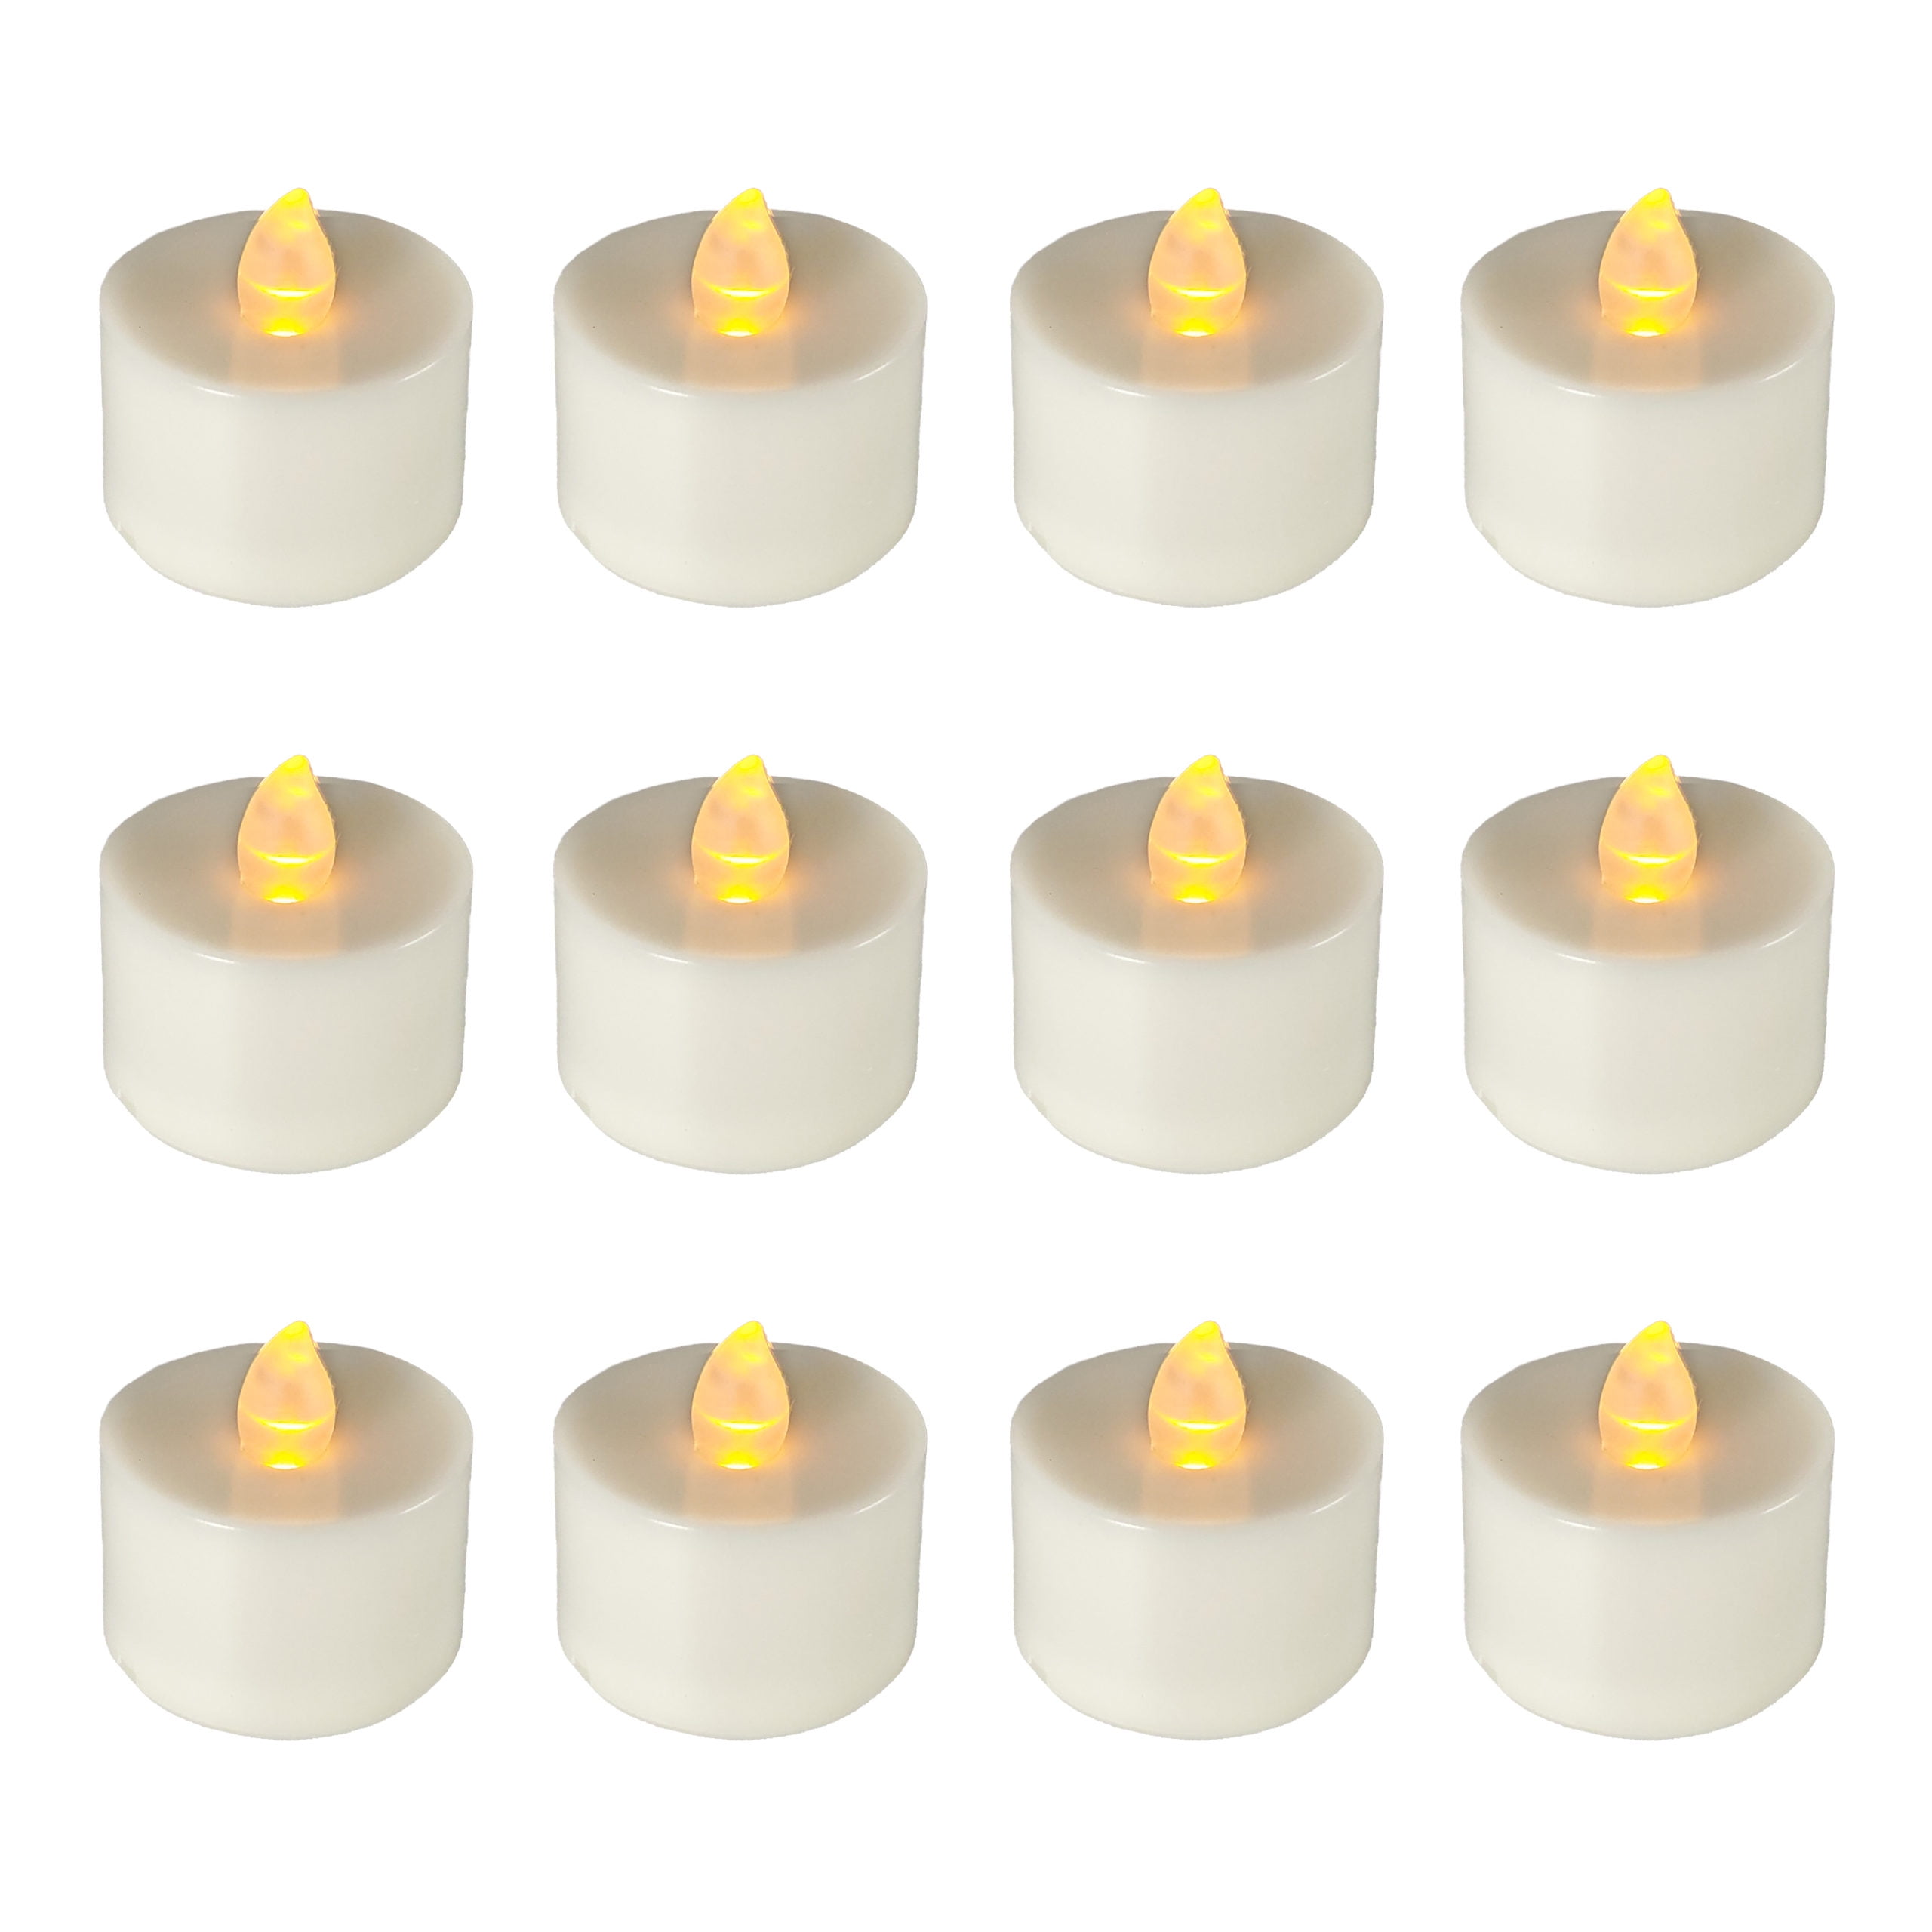 10 PCS Flameless Votive Candles Battery Operated submersible LED Tea Light USA